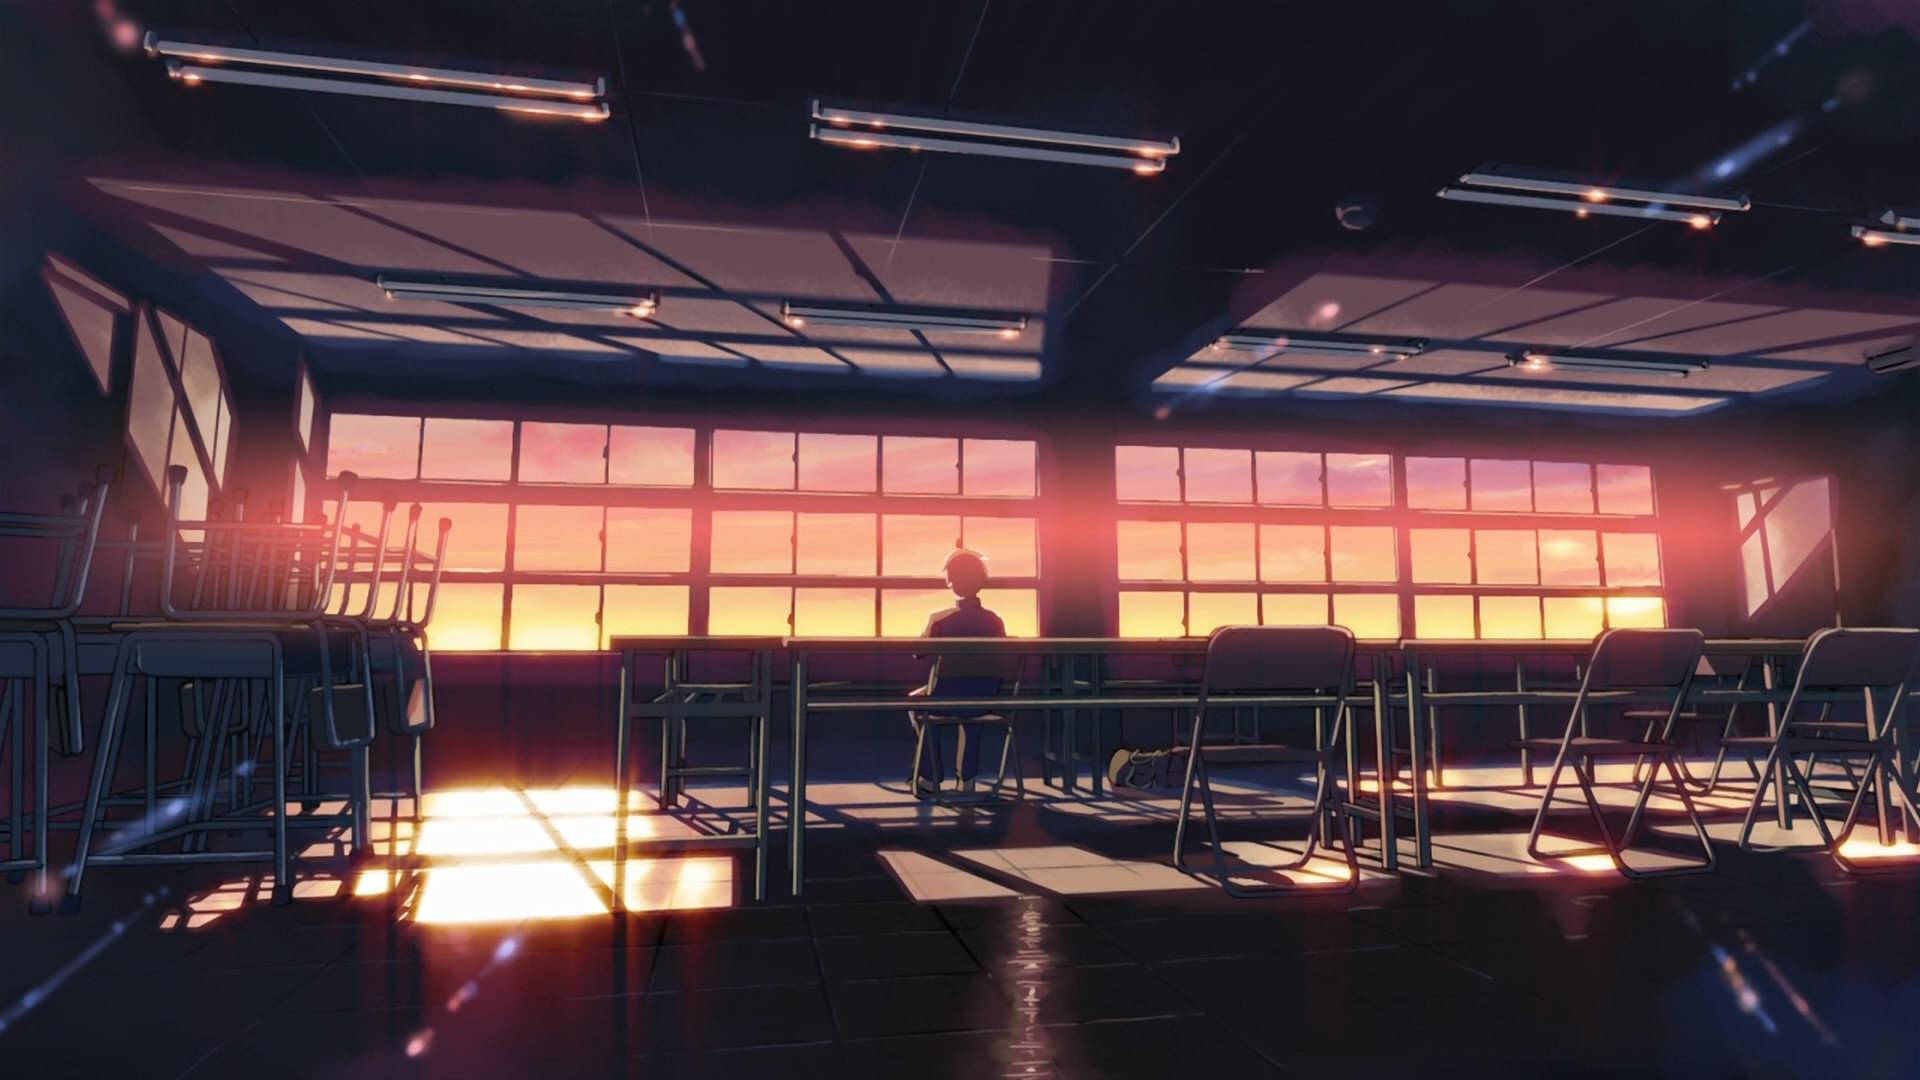 Anime School Scenery Student In Classroom After Hours Wallpaper